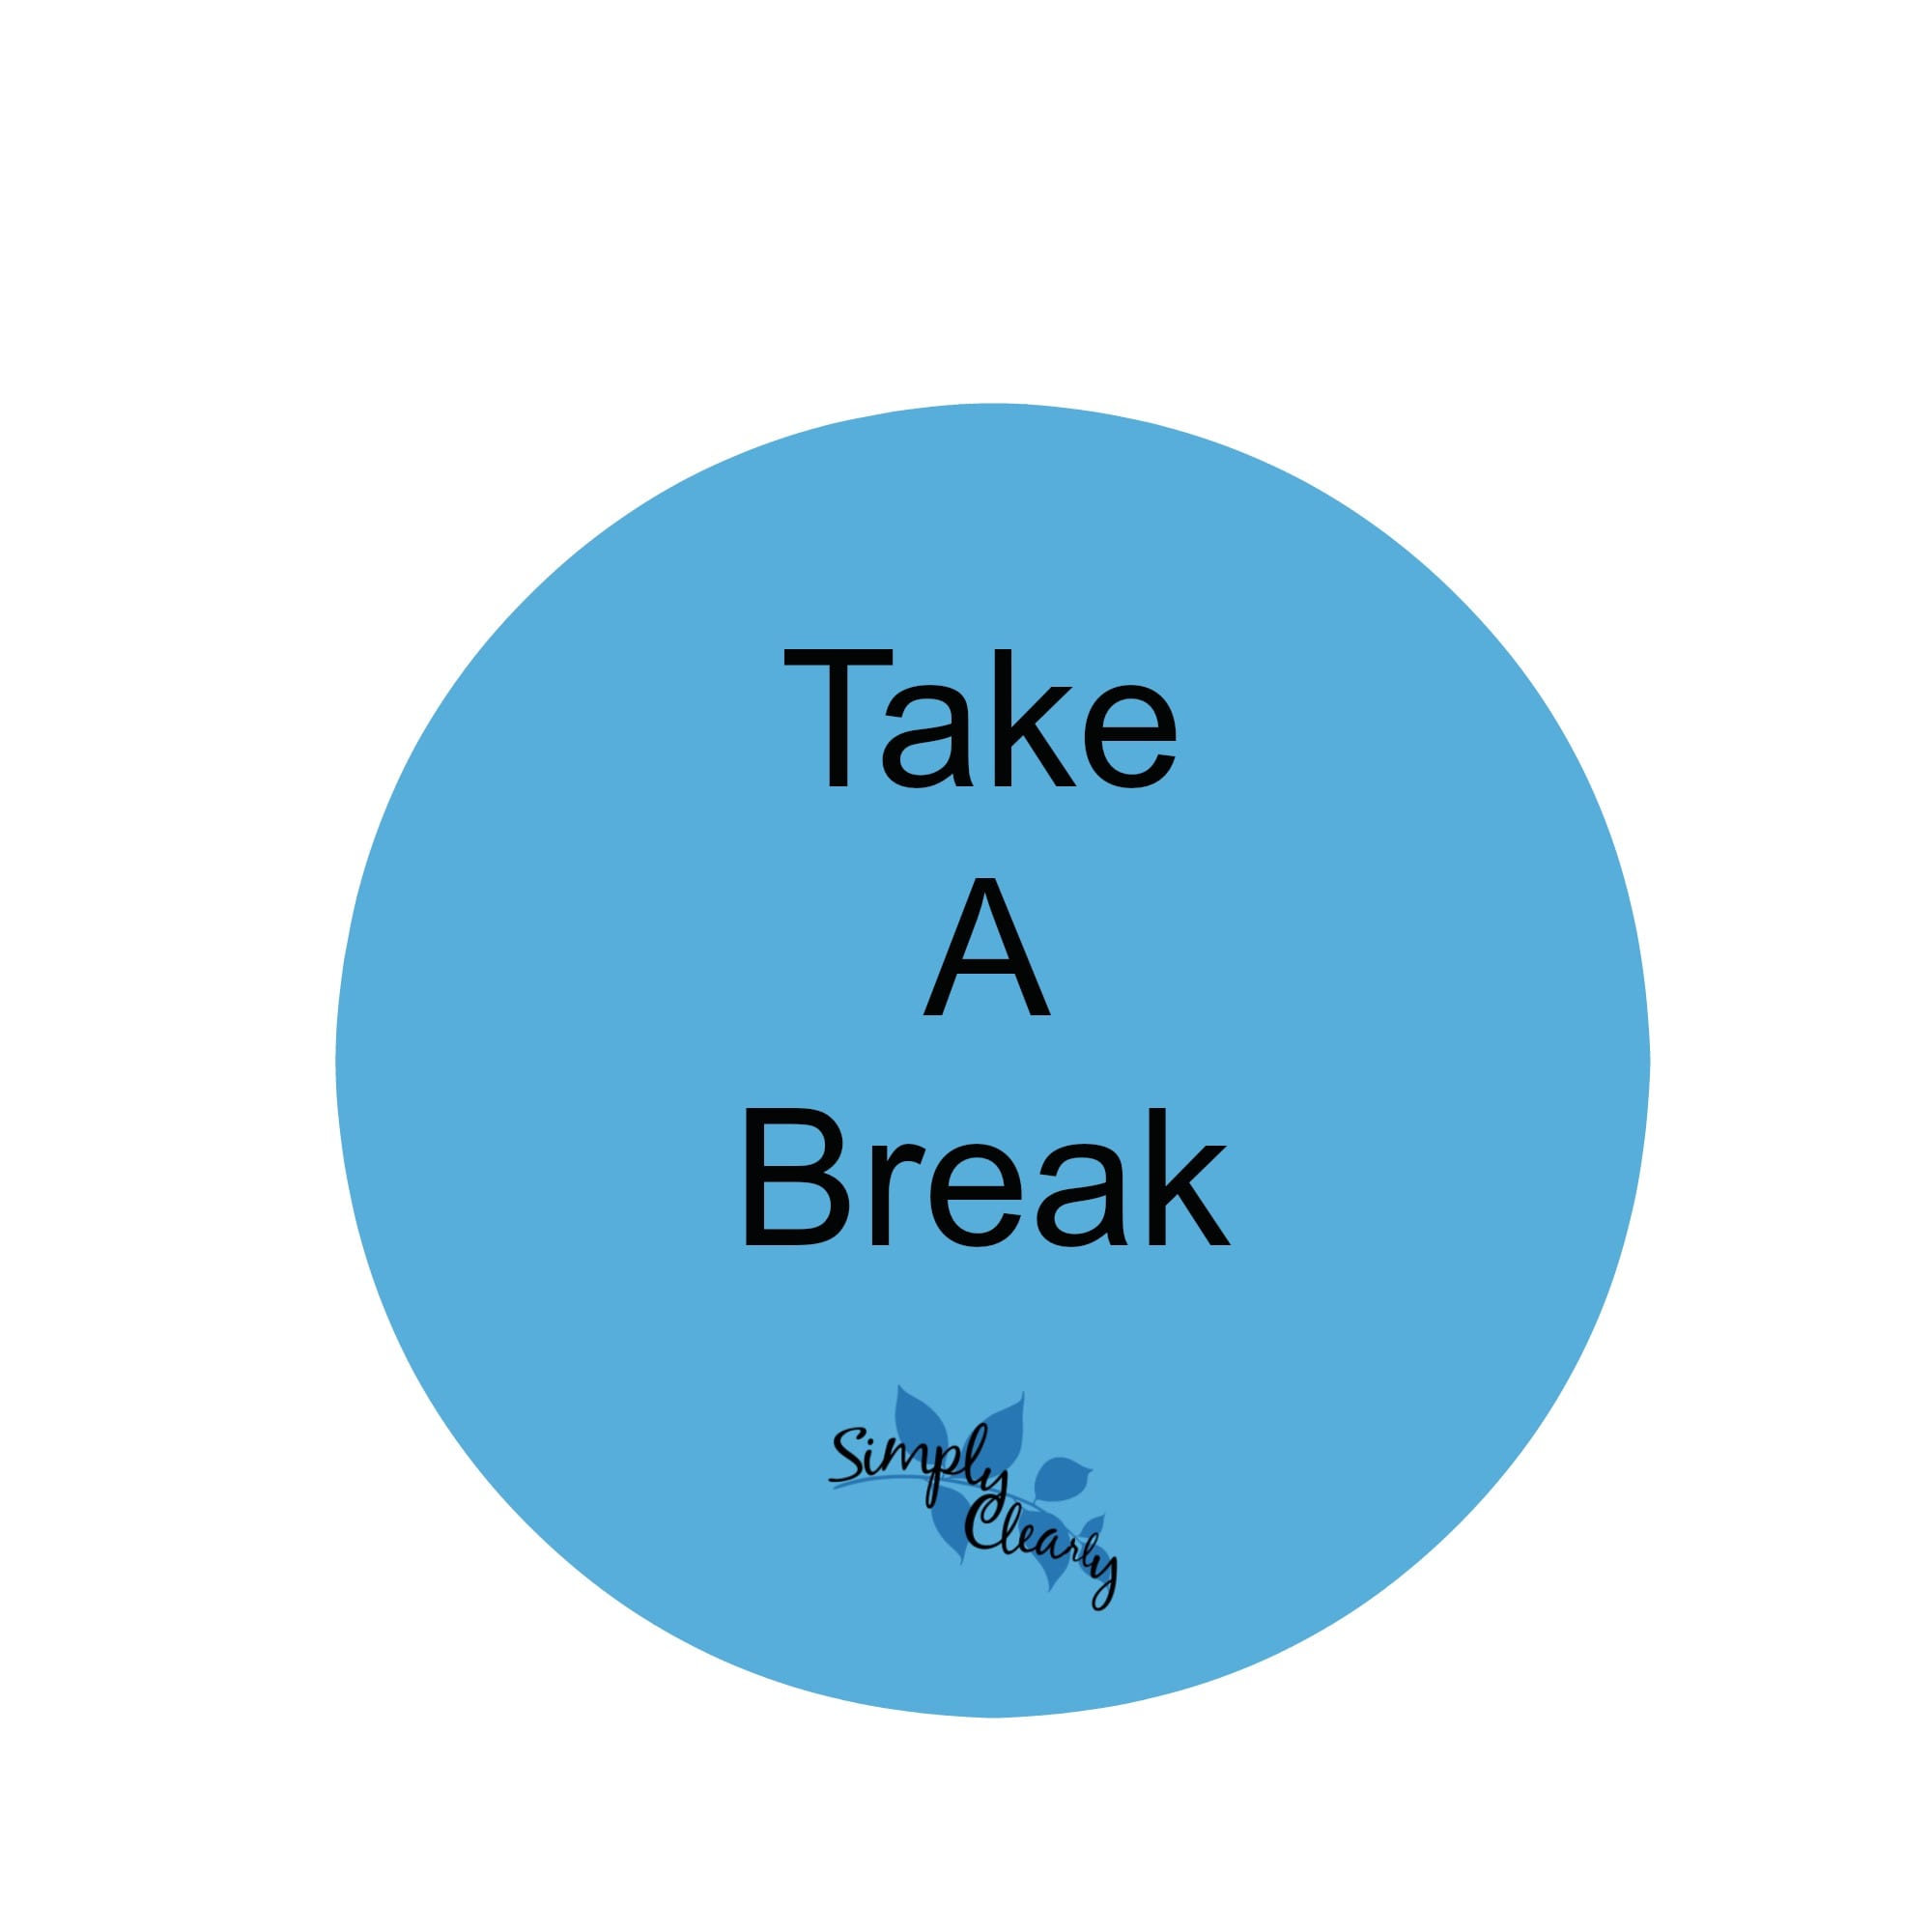 Take a Break - Simply Clearly.